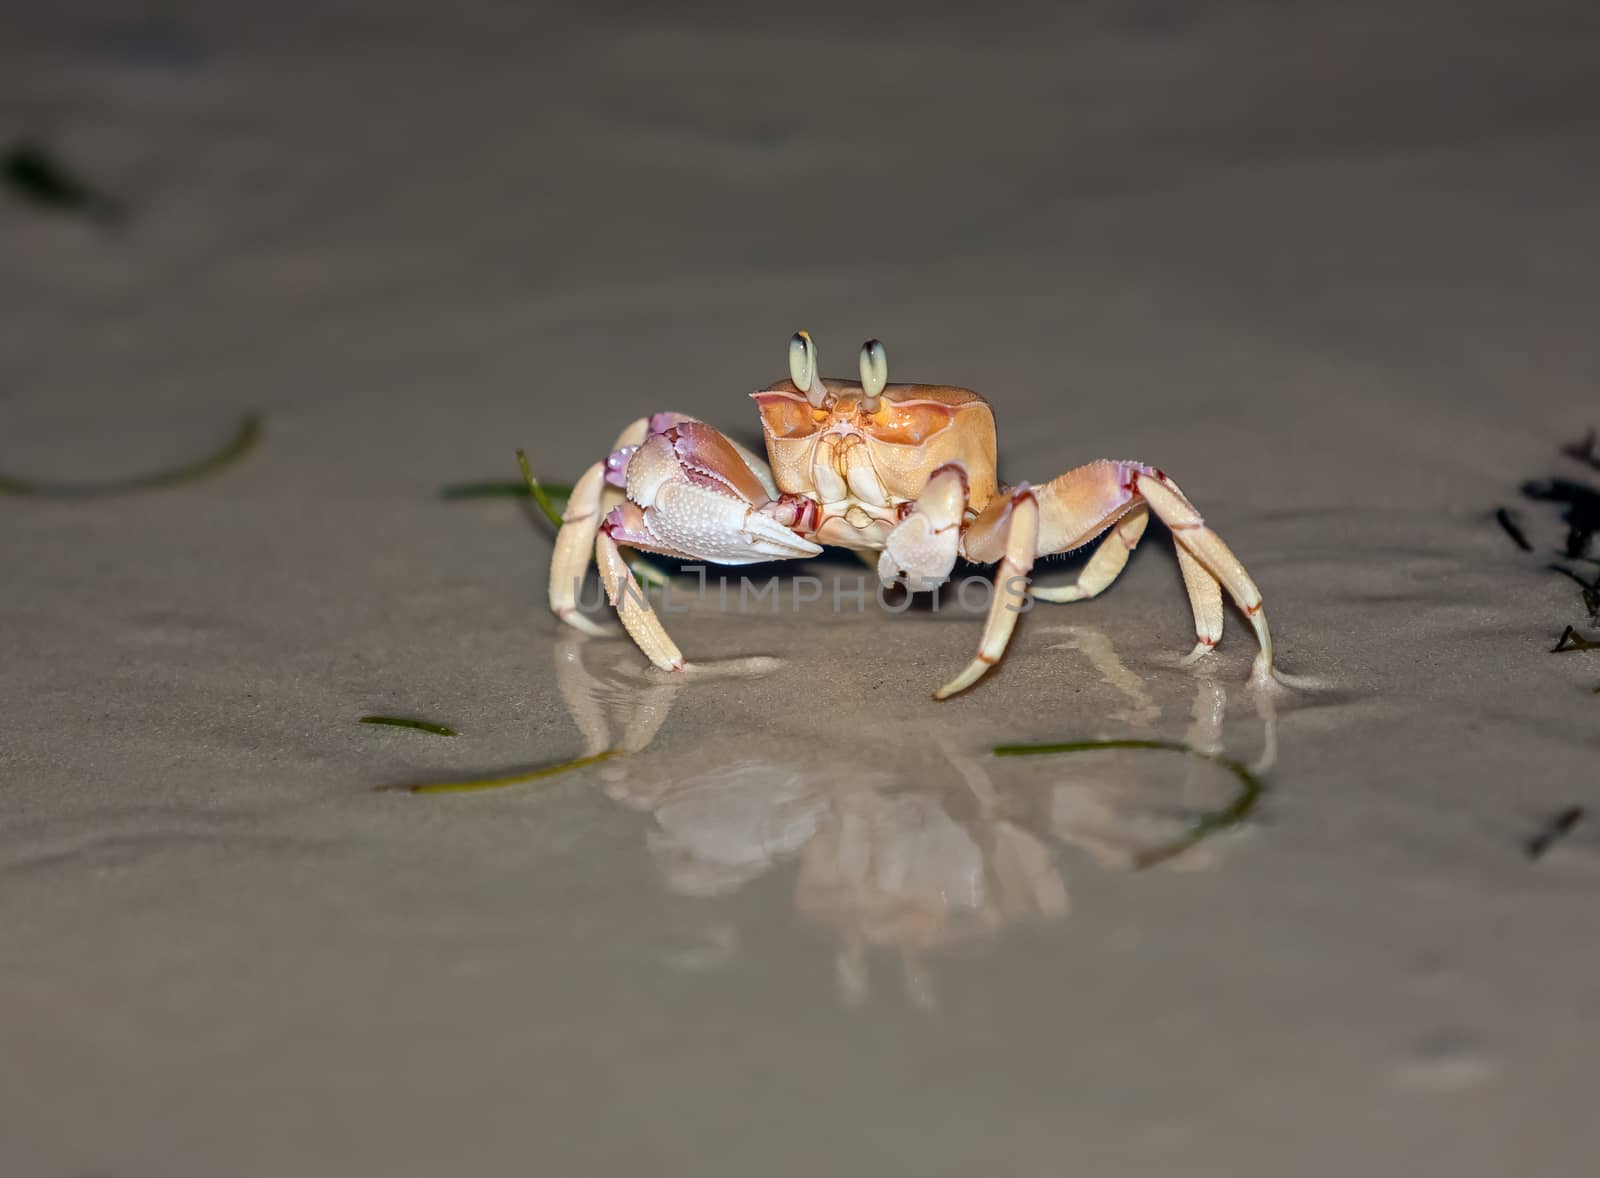 Crab on gray sand by master1305